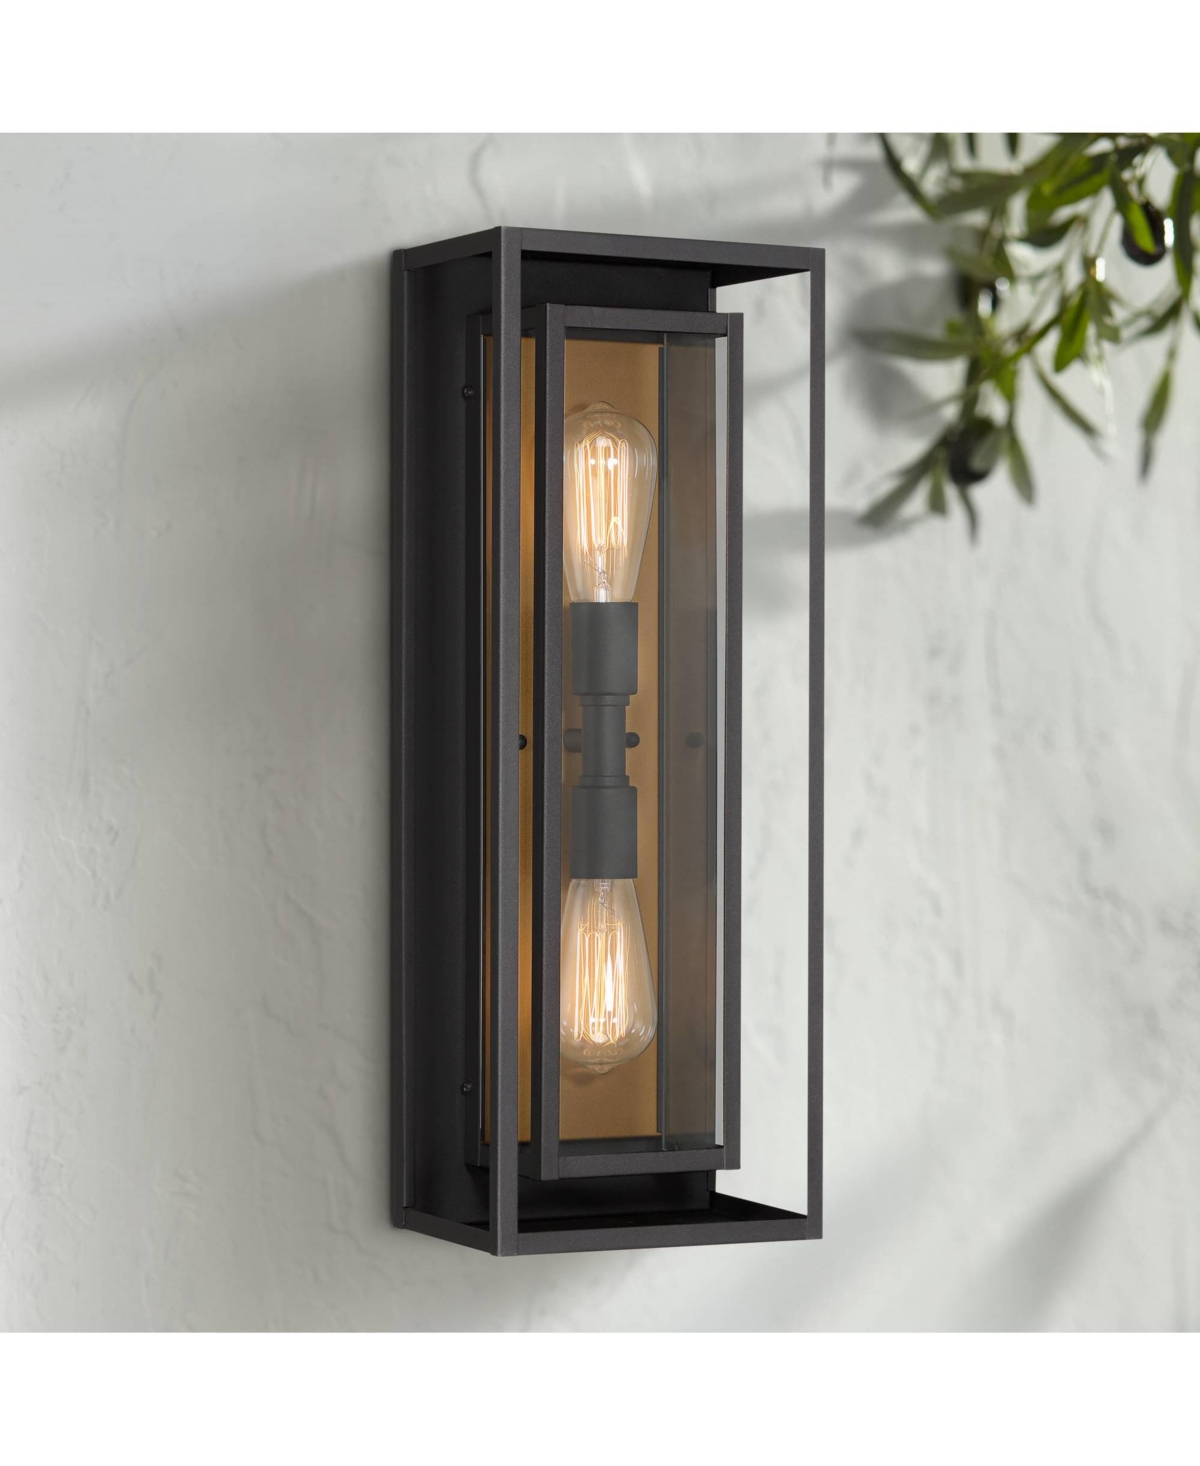 Metropolis Mid Century Modern Outdoor Wall Light Fixture Textured Black Soft Gold 22" Clear Glass Panels for Exterior House Porch Patio Outside Deck G